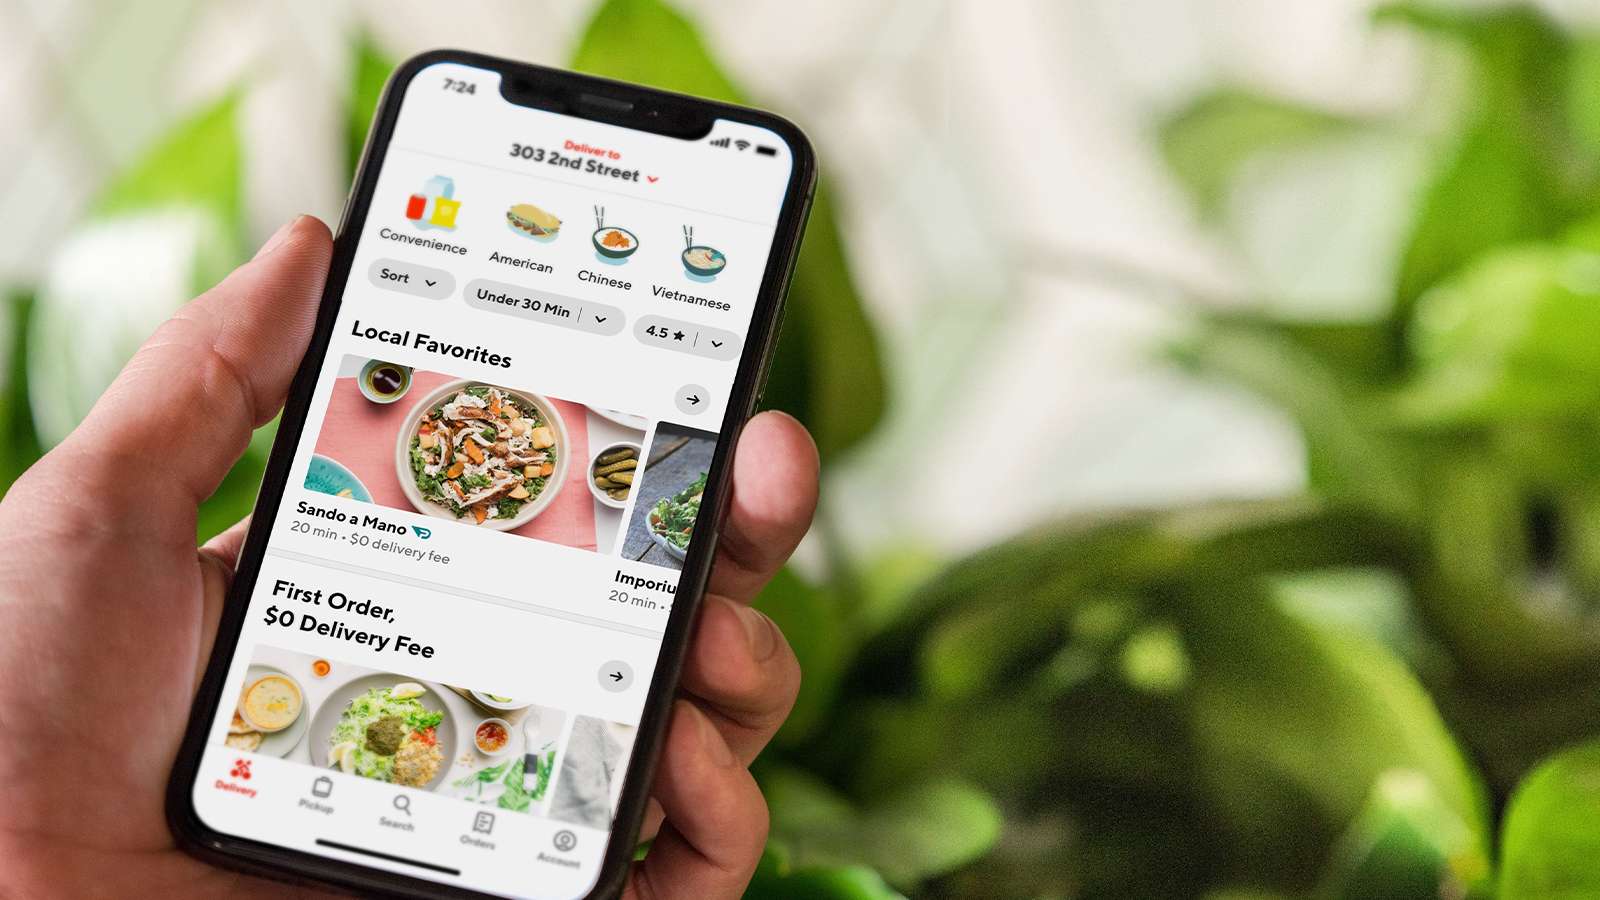 The DoorDash app on a mobile phone